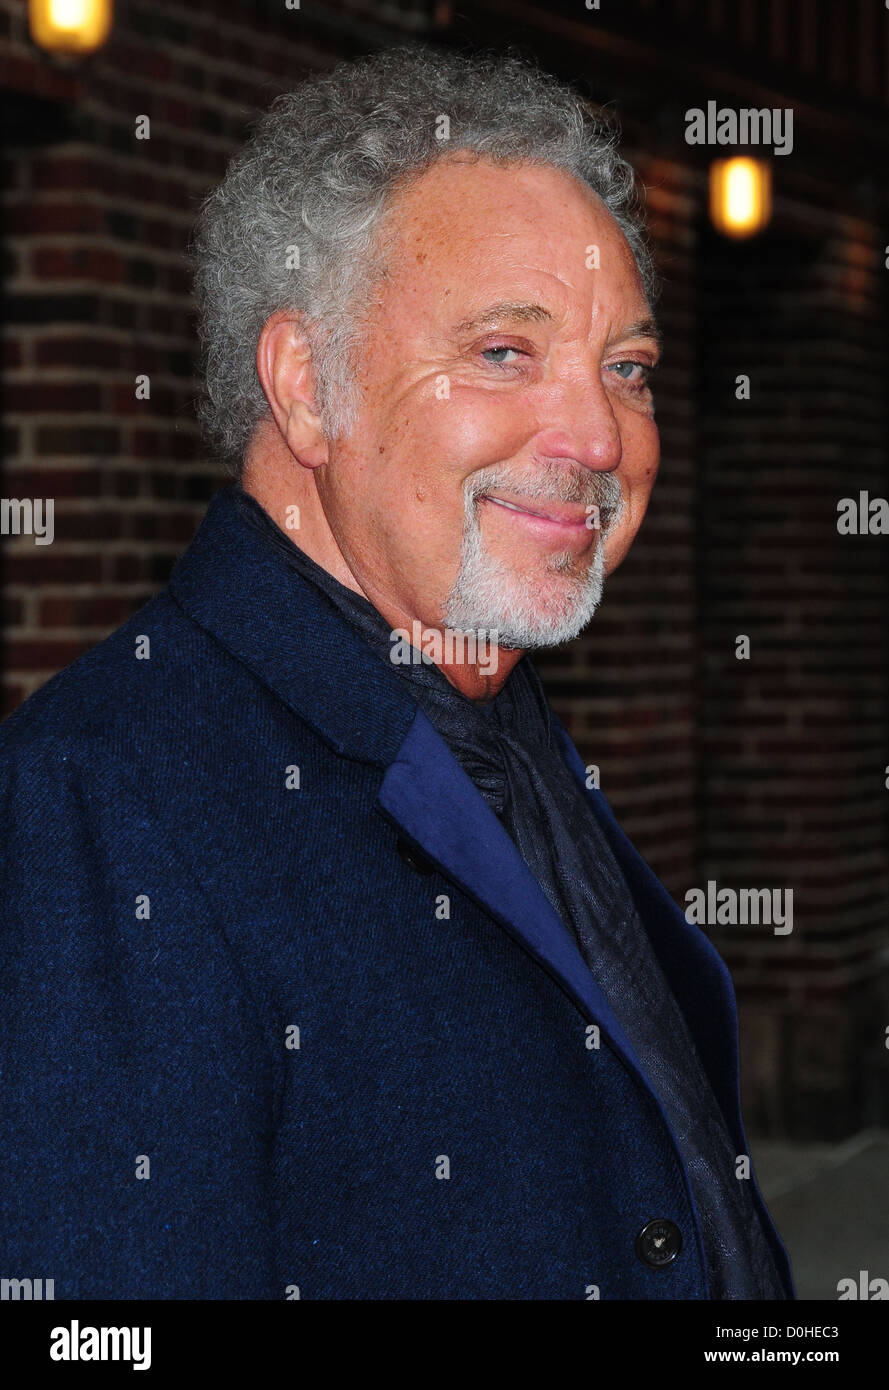 Tom Jones outside The Ed Sullivan Theater for 'The Late Show with David Letterman' New York City, USA - 22.09.10 Stock Photo